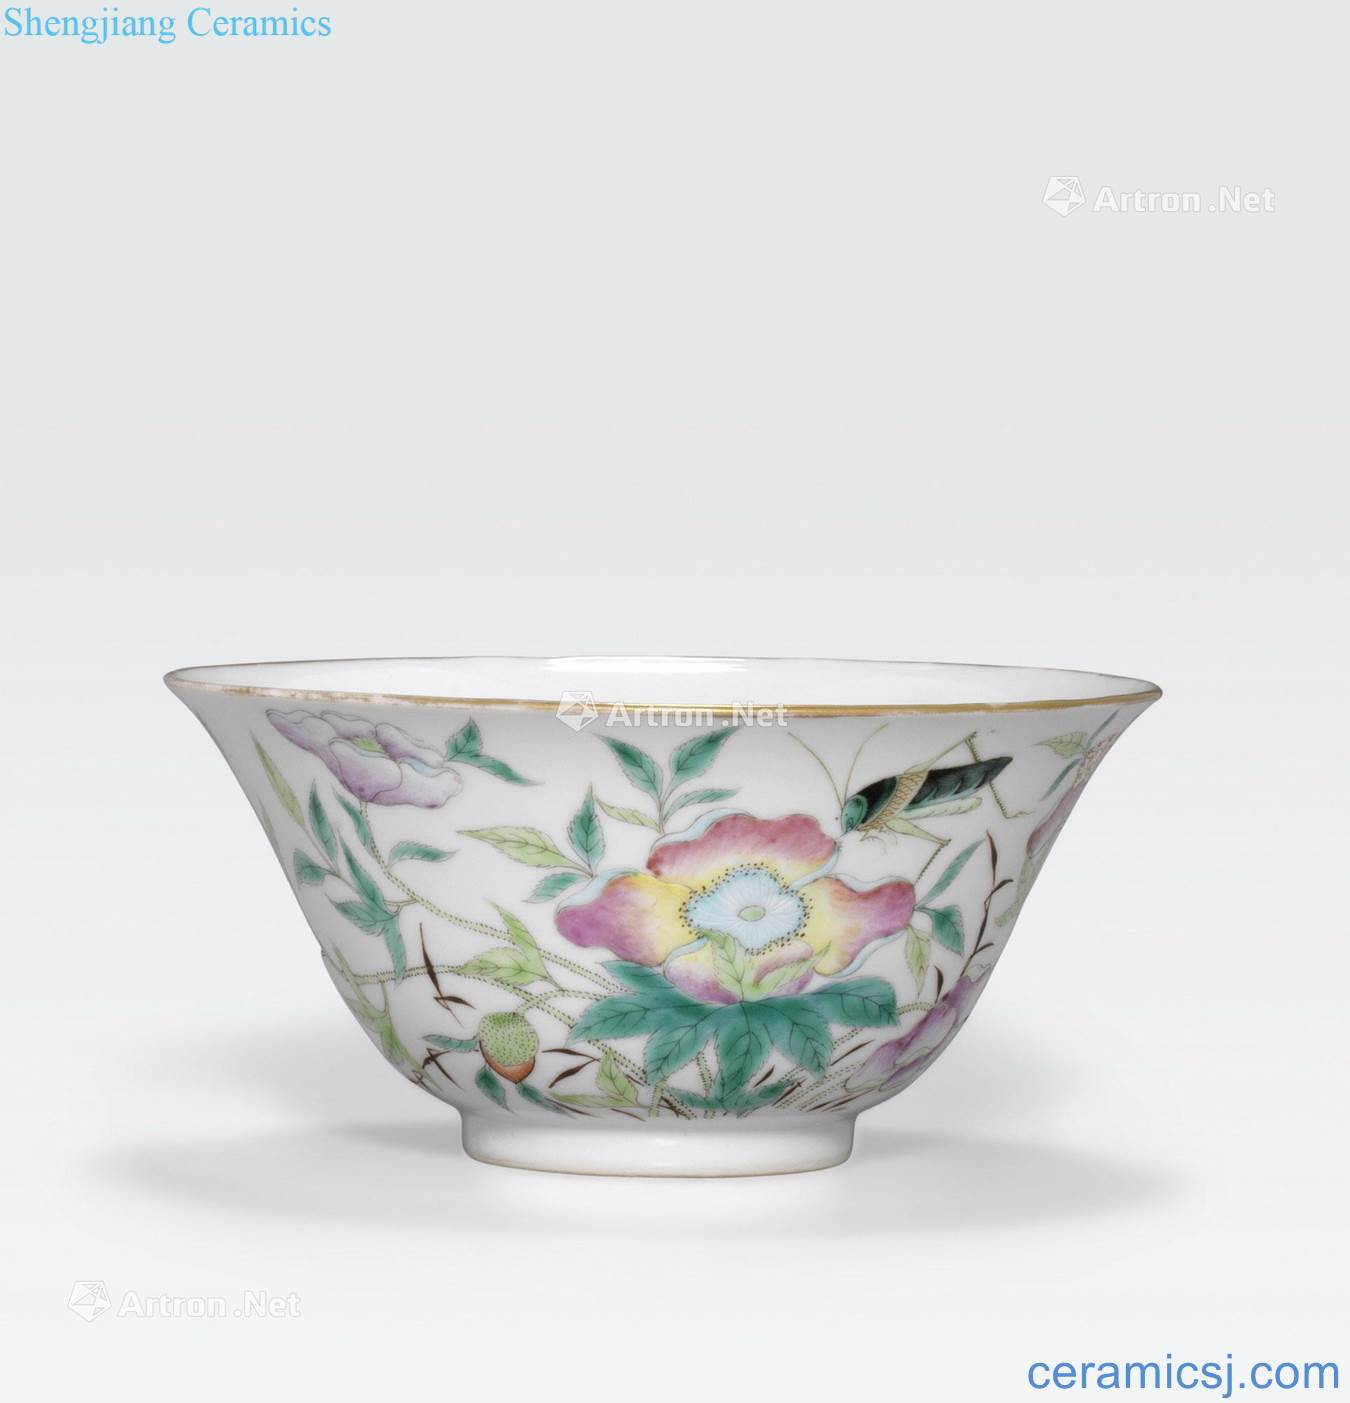 Guangxu mark, the Republic period A FAMILLE ROSE ENAMELED BOWL WITH MALLOW AND CRICKET DECORATION